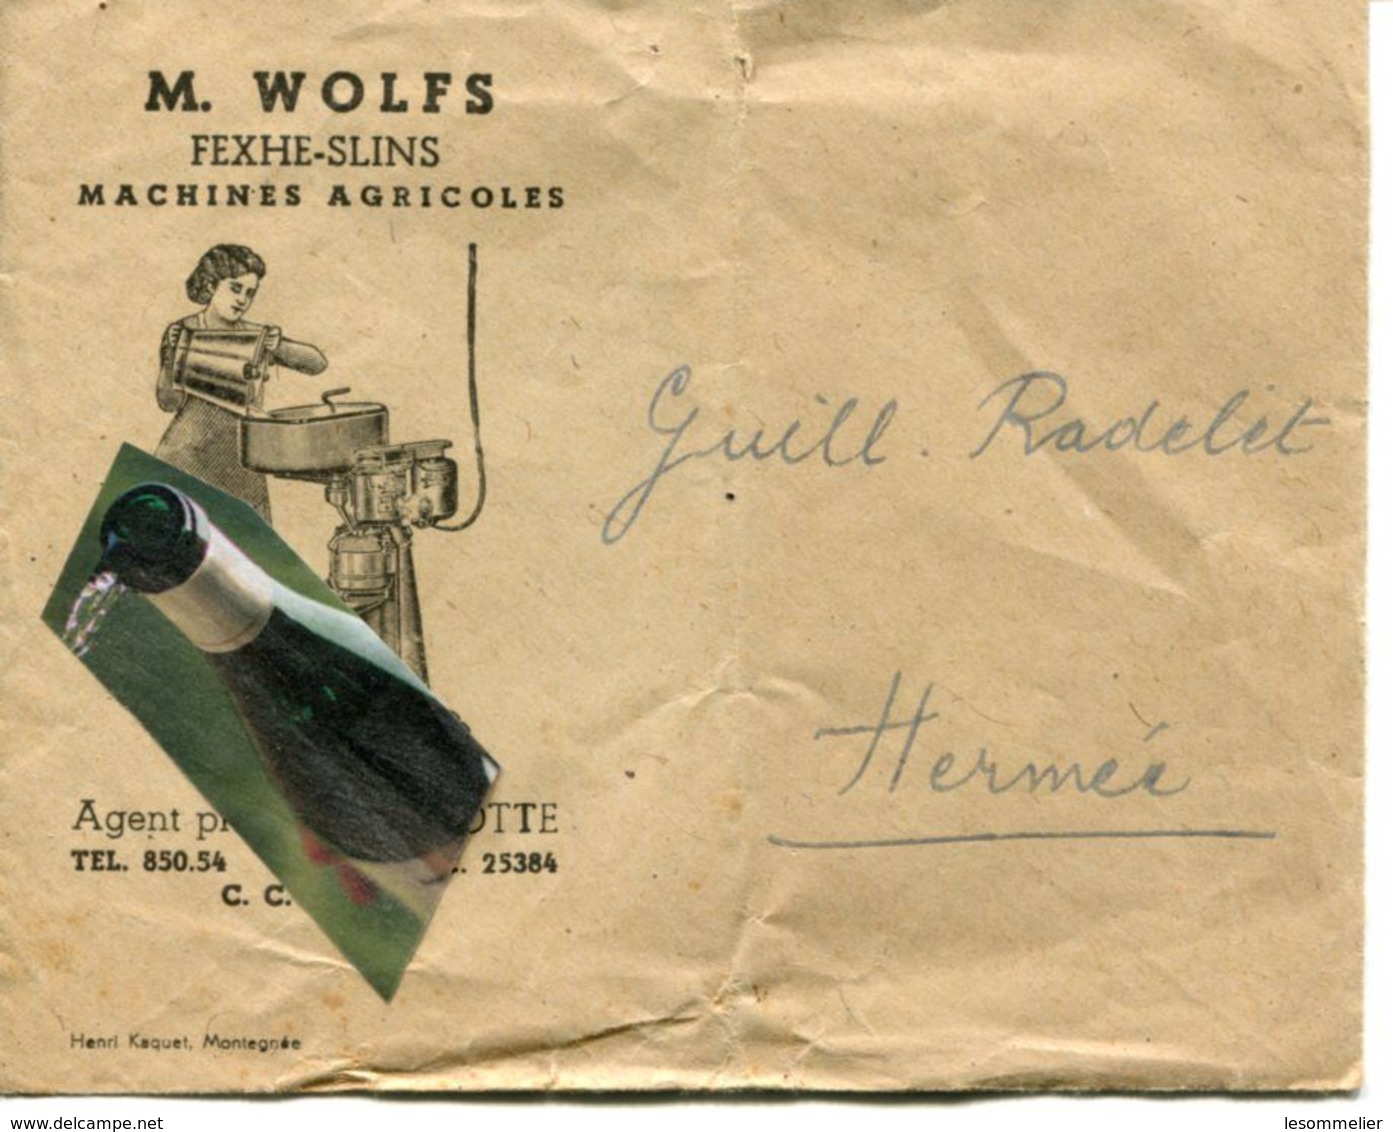 HERMEE / FEXHE SLINS / FERME / LAITERIE / MELOTTE / DEERING / 1944 / MACHINE AGRICOLE / WOLFS - Agriculture